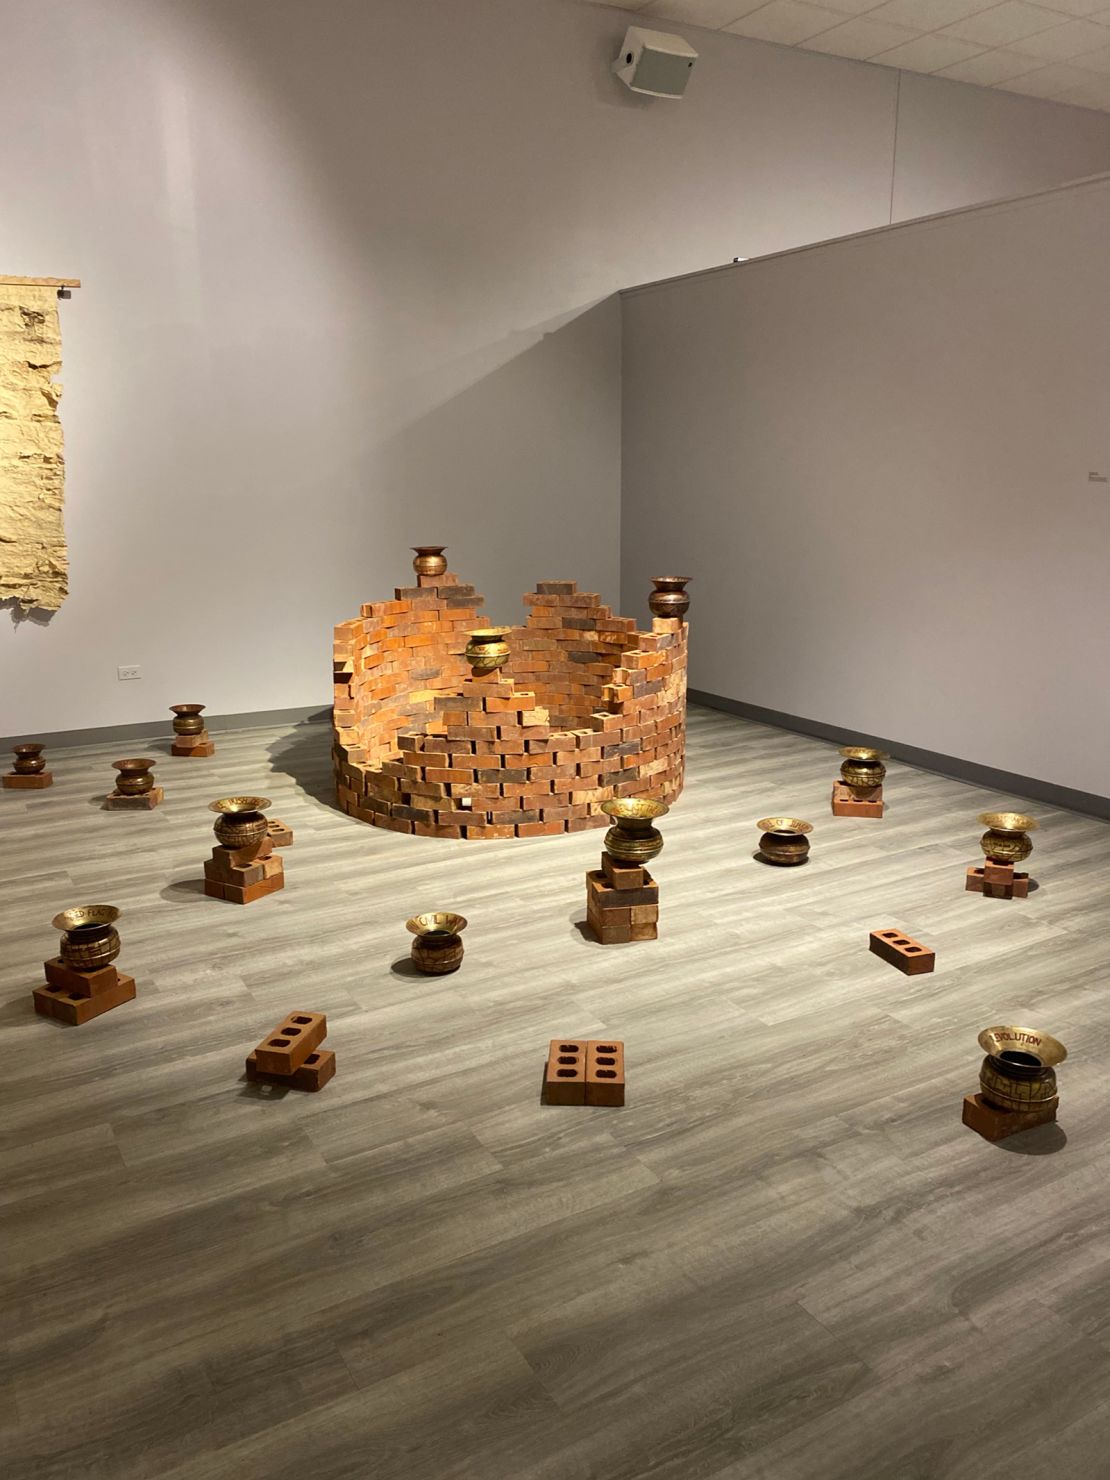 Chowdhry's installation "An Archive of 1919: The Year of the Crack-Up," which centers on the Jallianwala Bagh massacre of 1919.